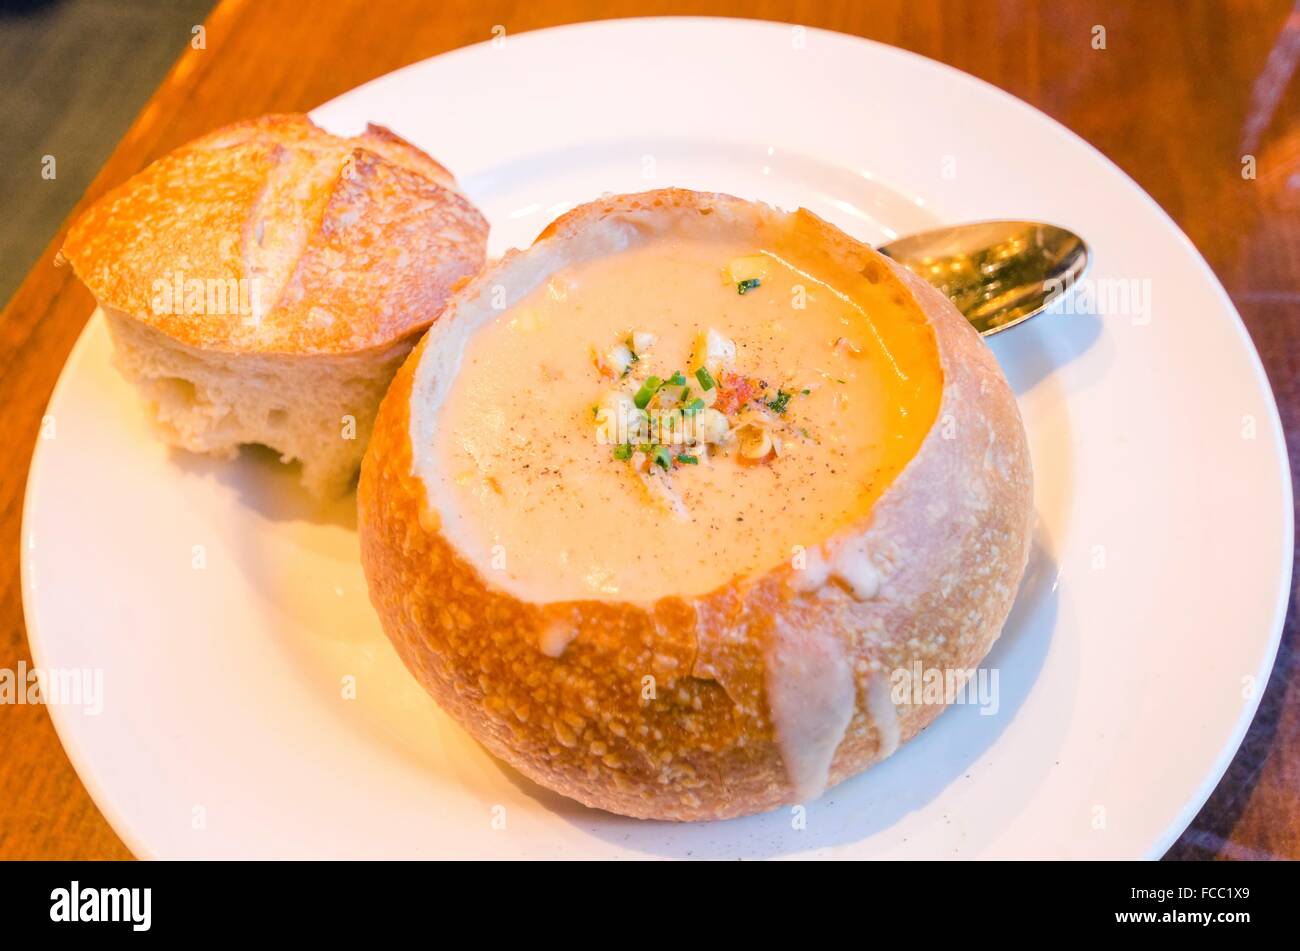 Close up of a Sourdough Clam Chowder gourmet dish. A creamy soup made of clams and vegetables served in a loaf of bread by remov Stock Photo